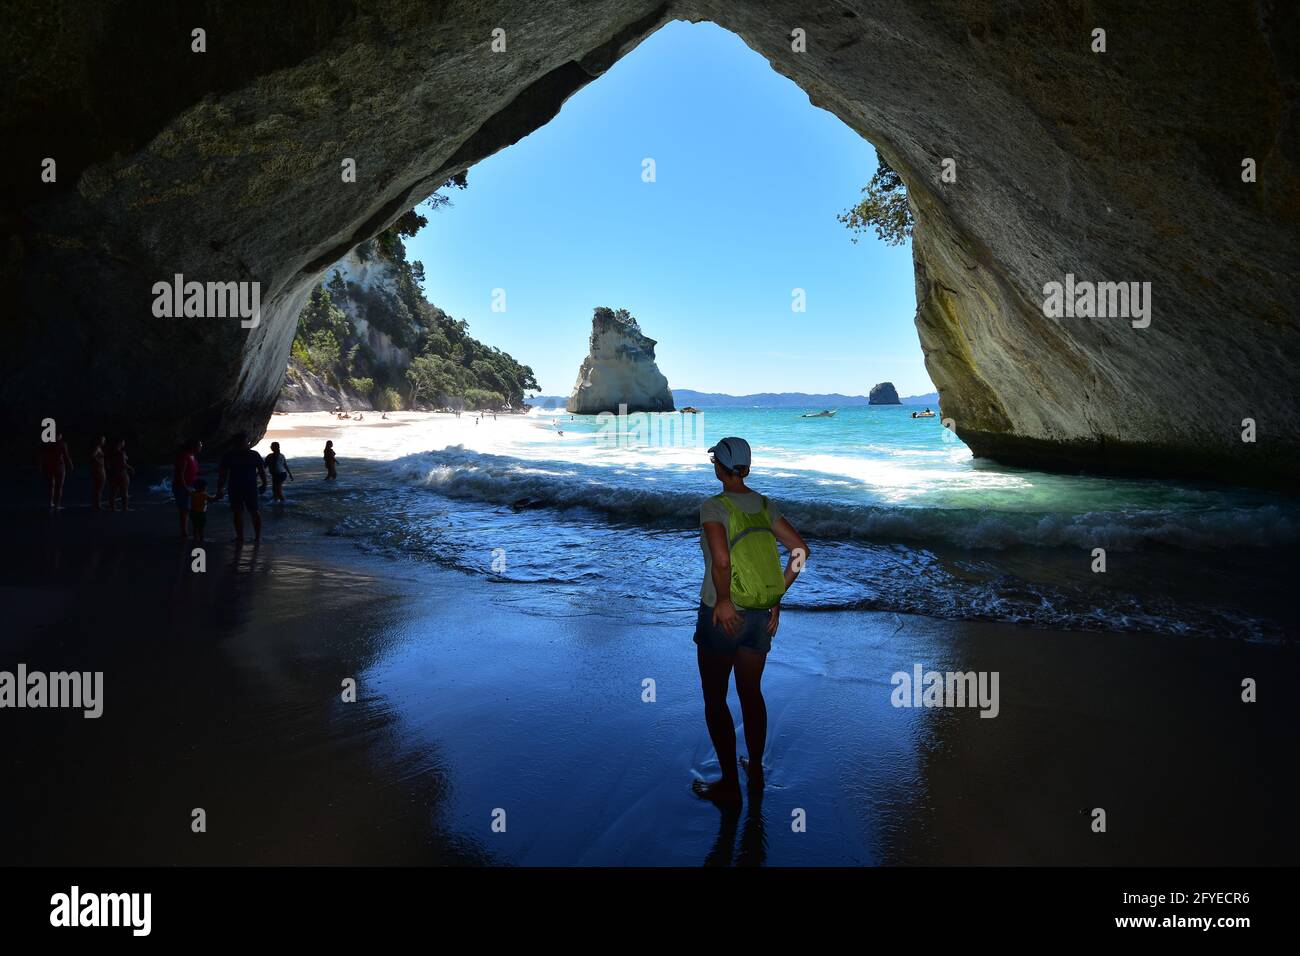 Female tourist with green backpack and other holidaymakers under natural rock arch in Cathedral Cove. Stock Photo